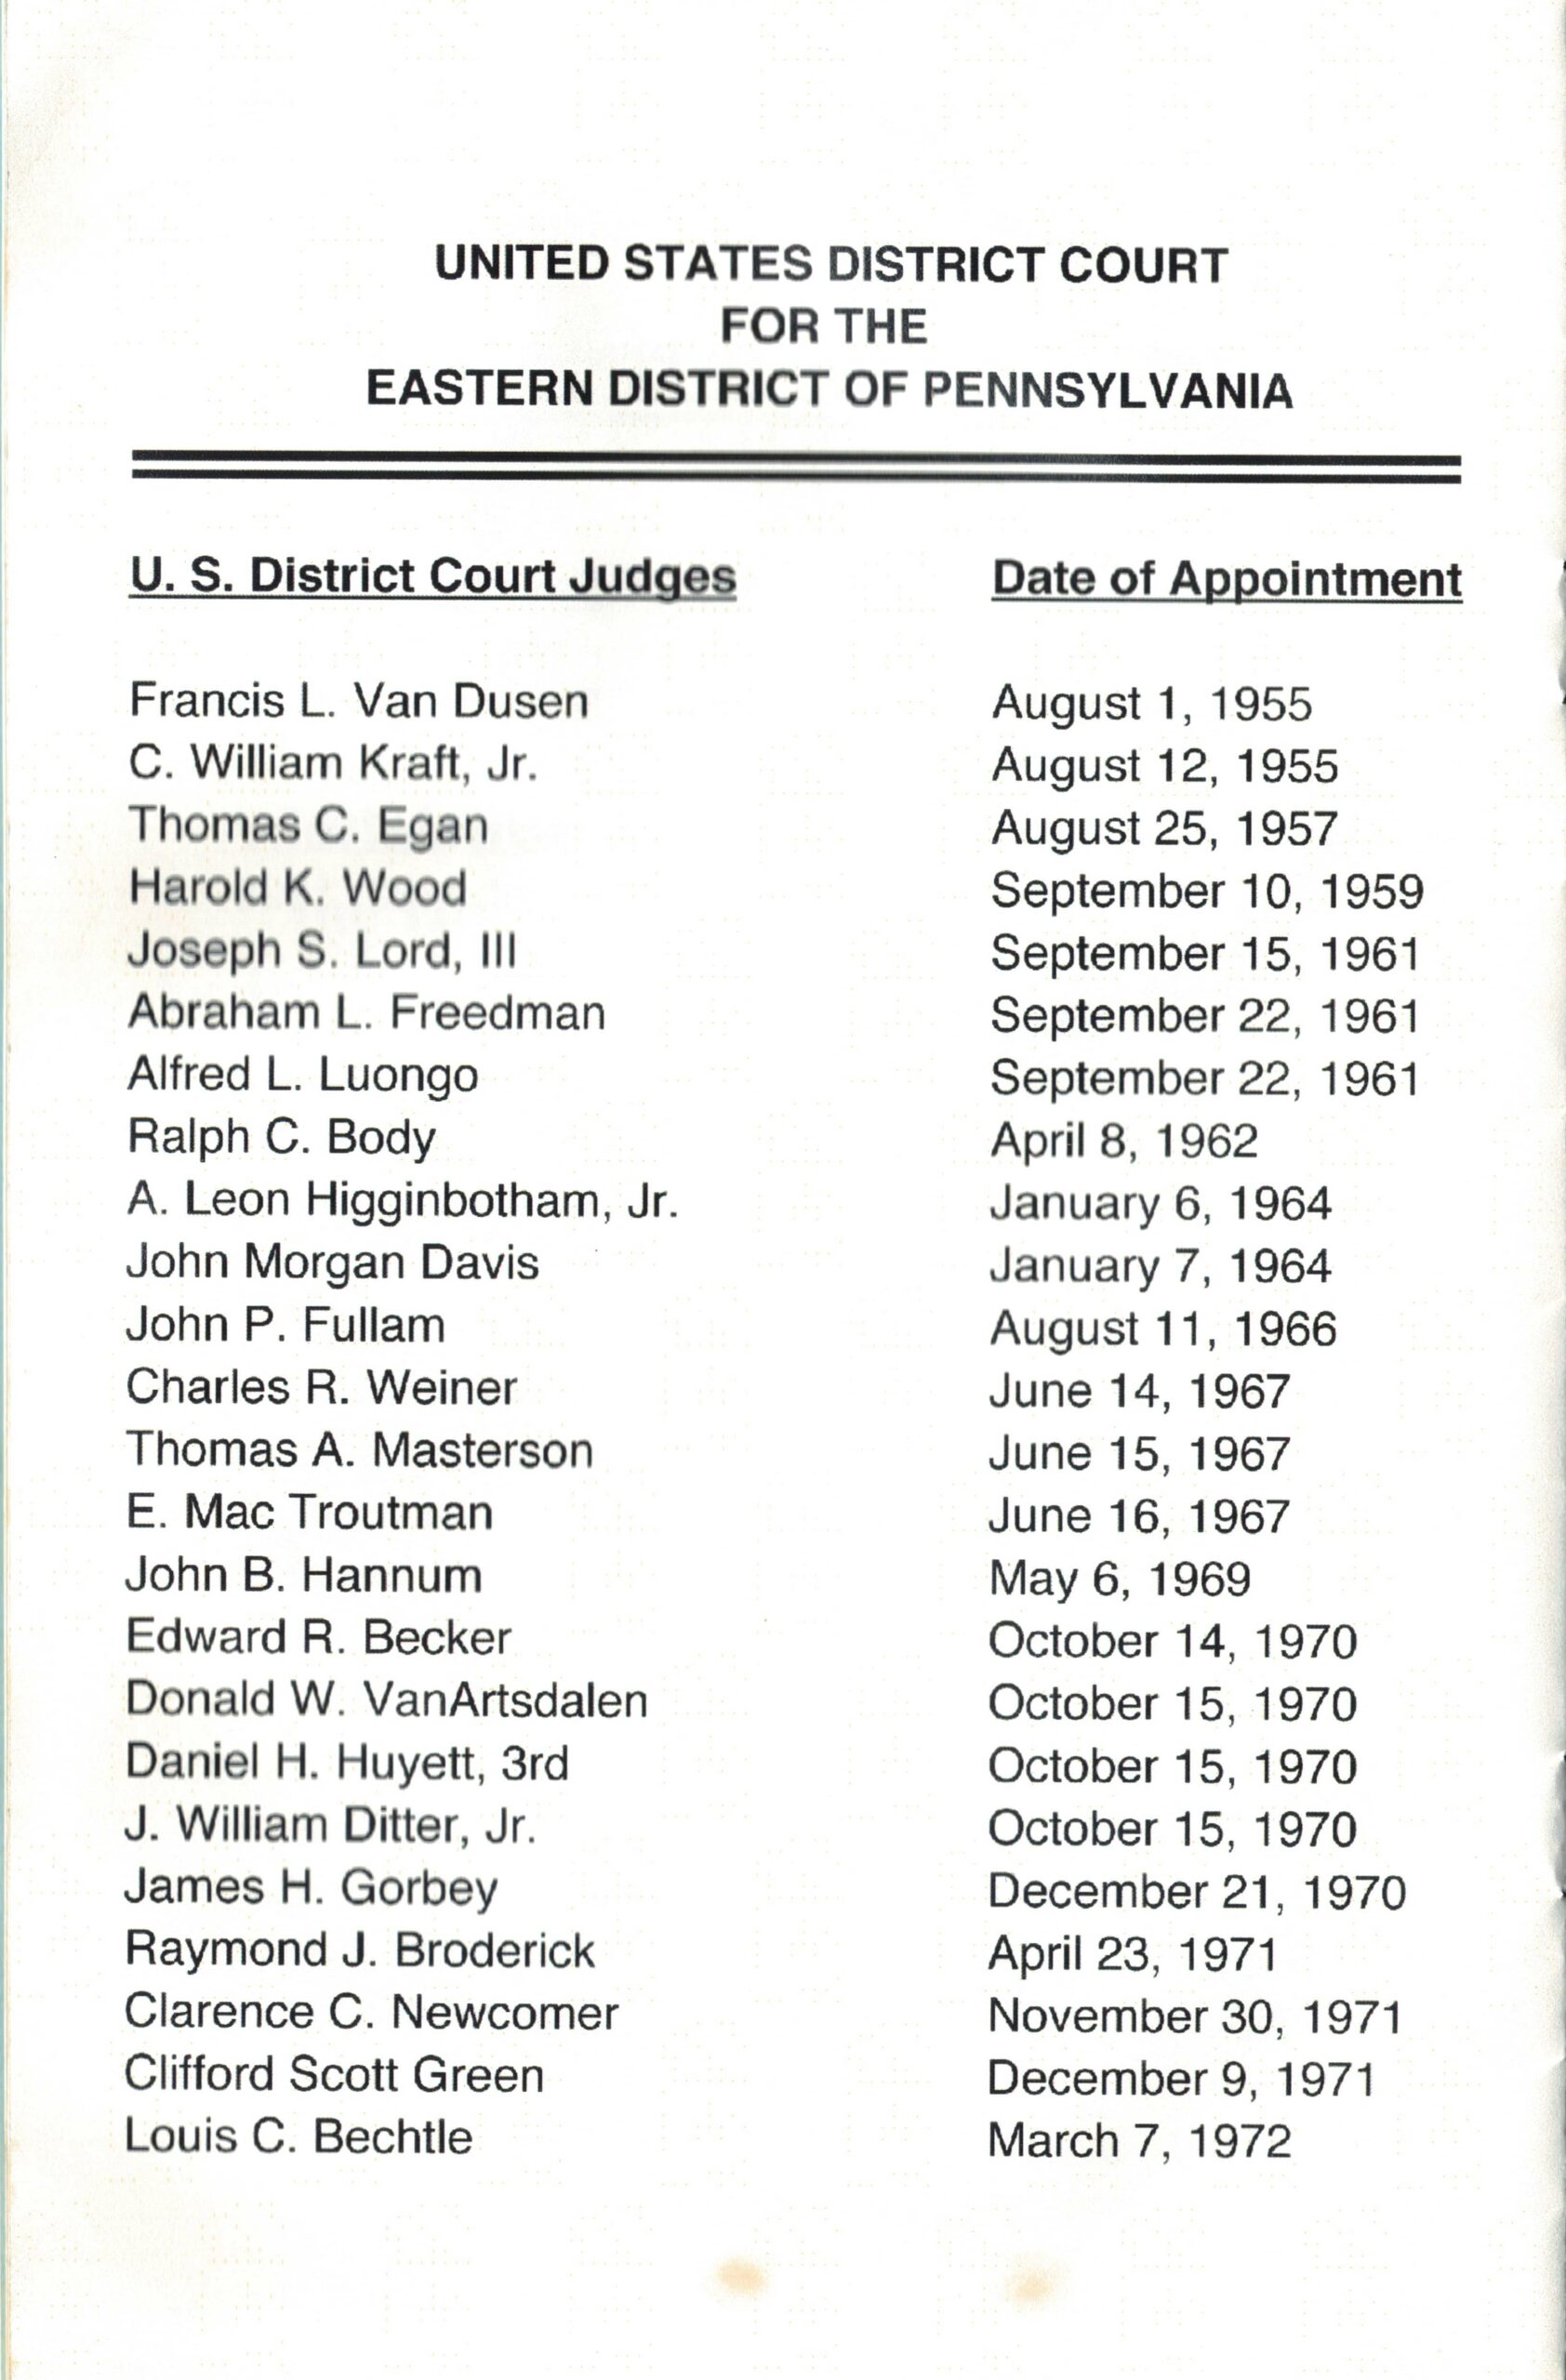 Twelfth page of the Jones program pamphlet with second page of U.S. District Court judges and dates of appointment.